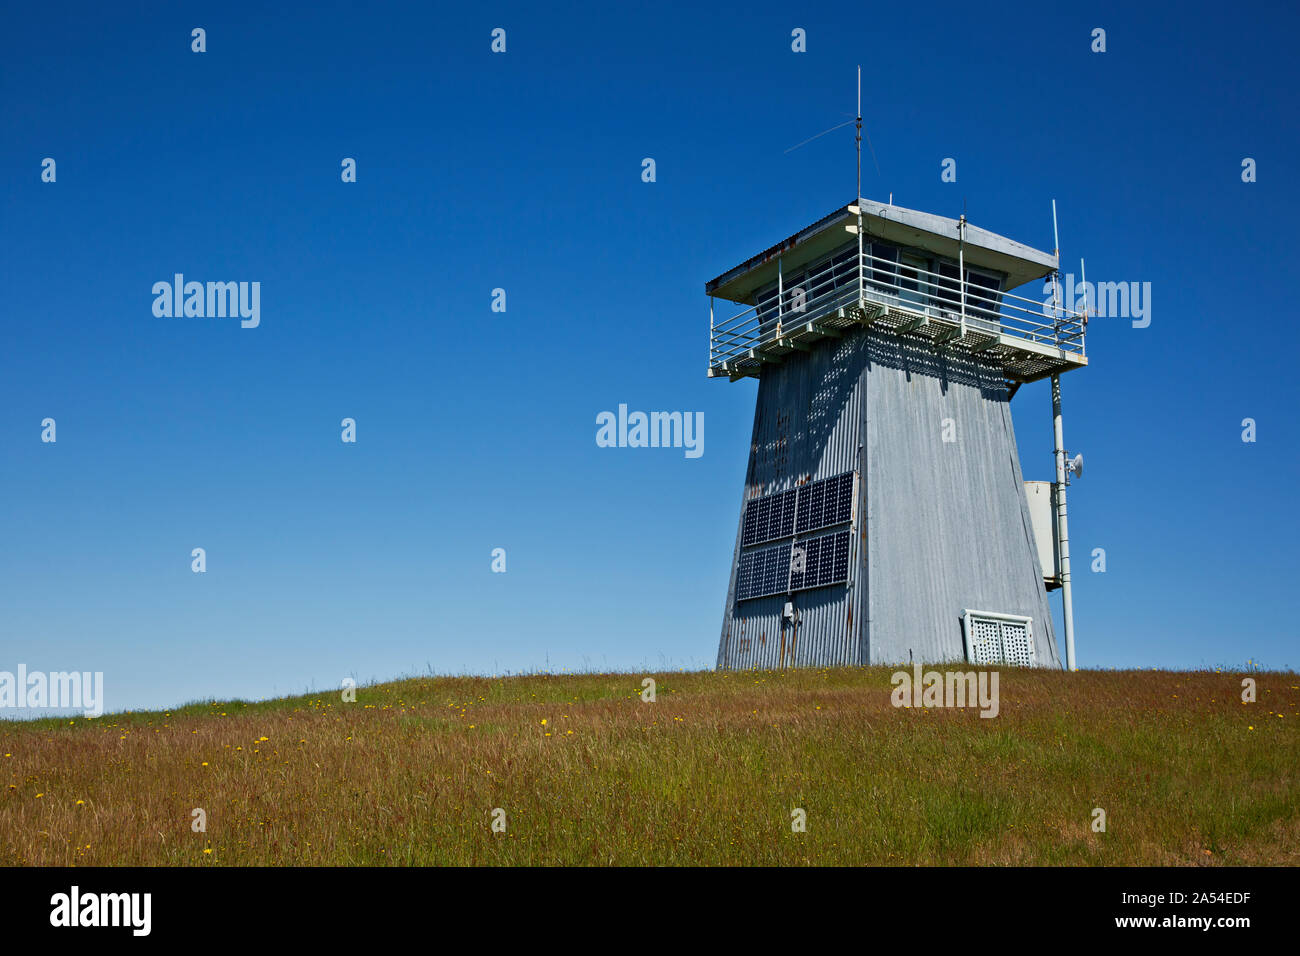 CA03734-00...CALIFORNIA - Schoolhouse Peak Fire Lookout located in the Bald Hills area of Redwoods National Park. Stock Photo